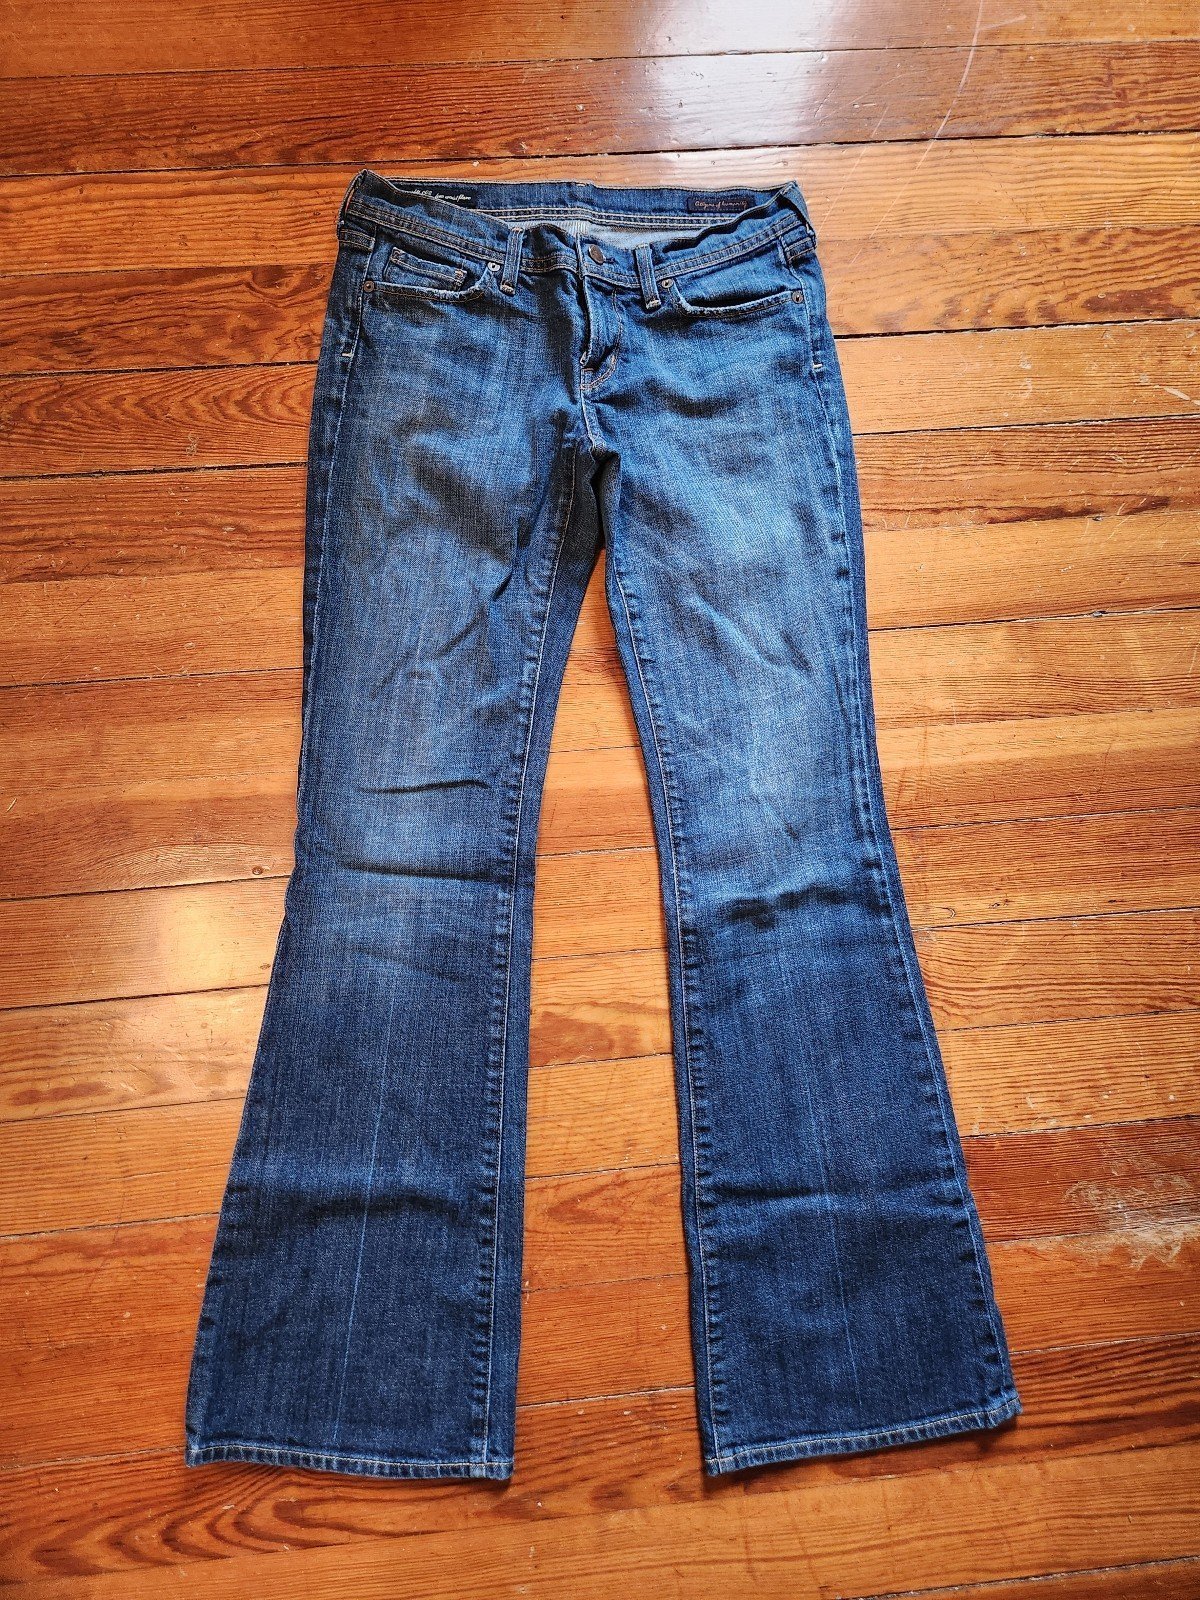 Jeans by Citizens of Humanity,  size 29 C5B7g44Yk